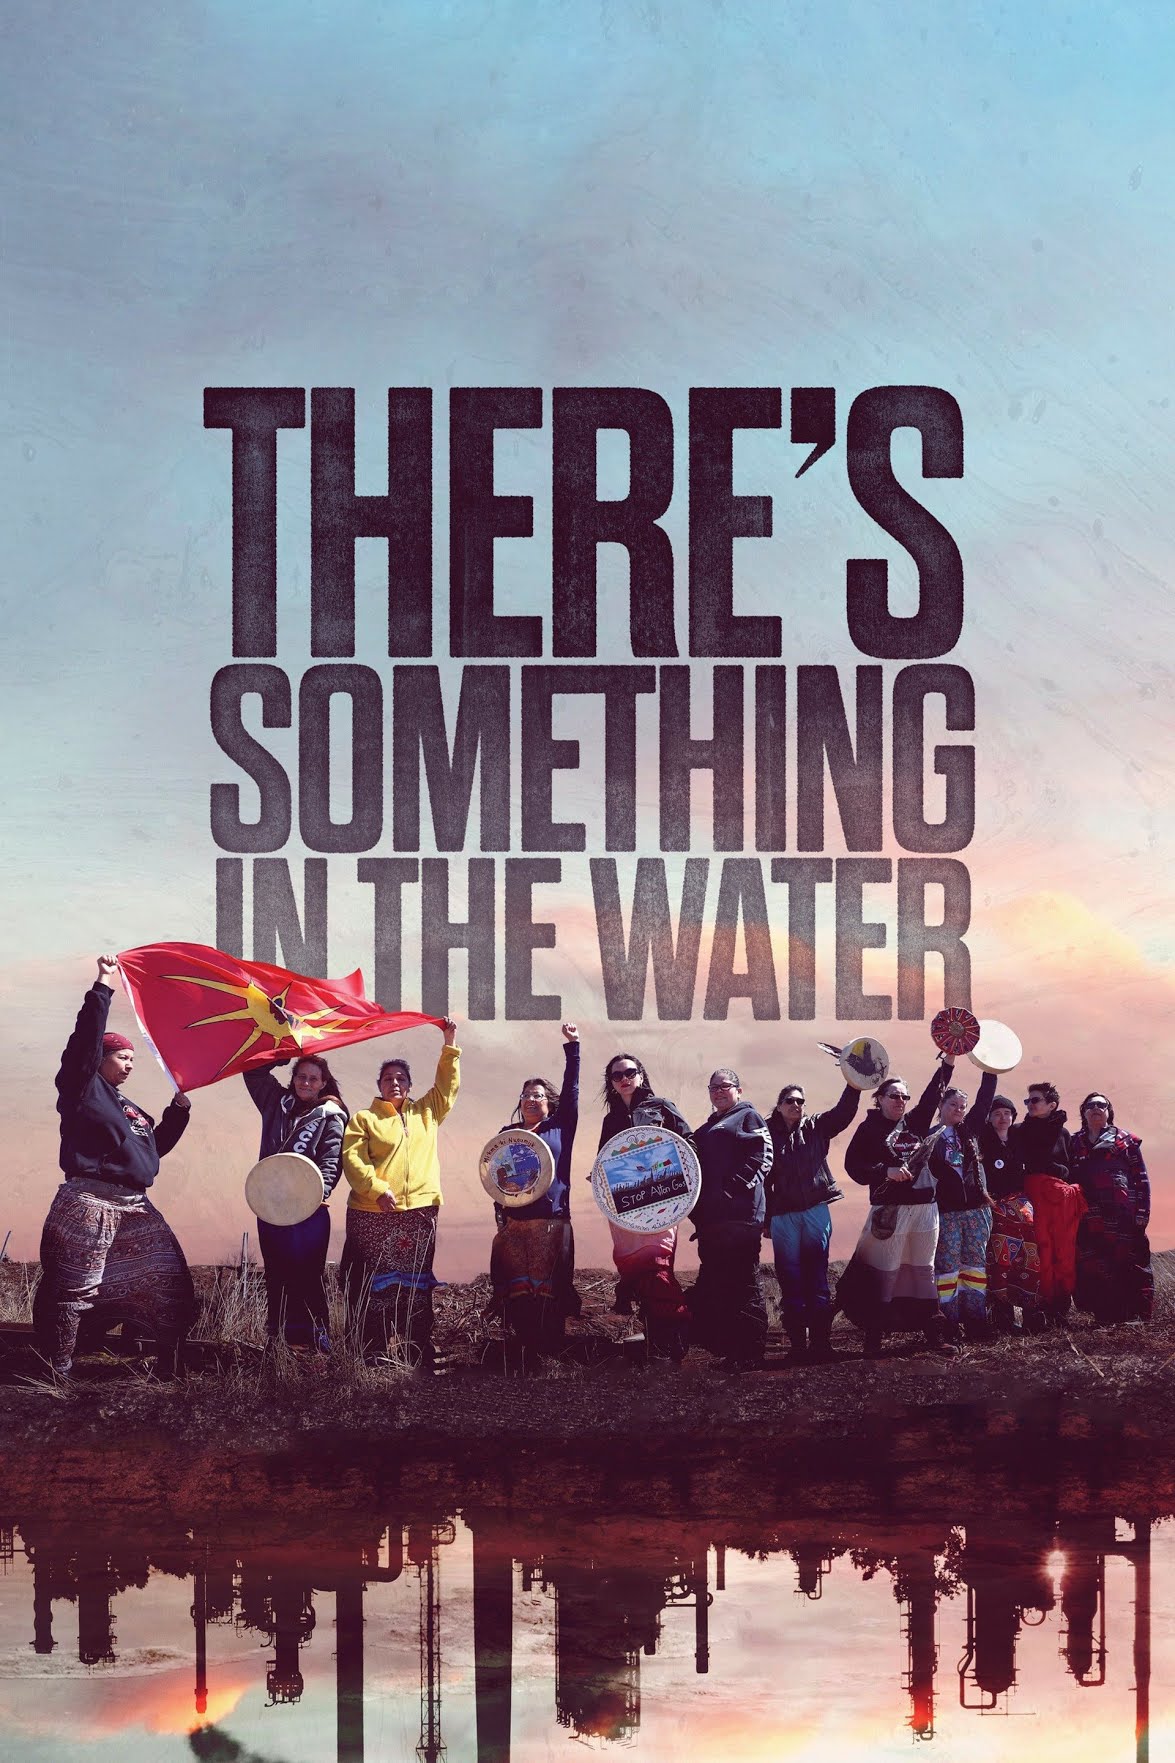 Cover of "There's Something in the Water" film